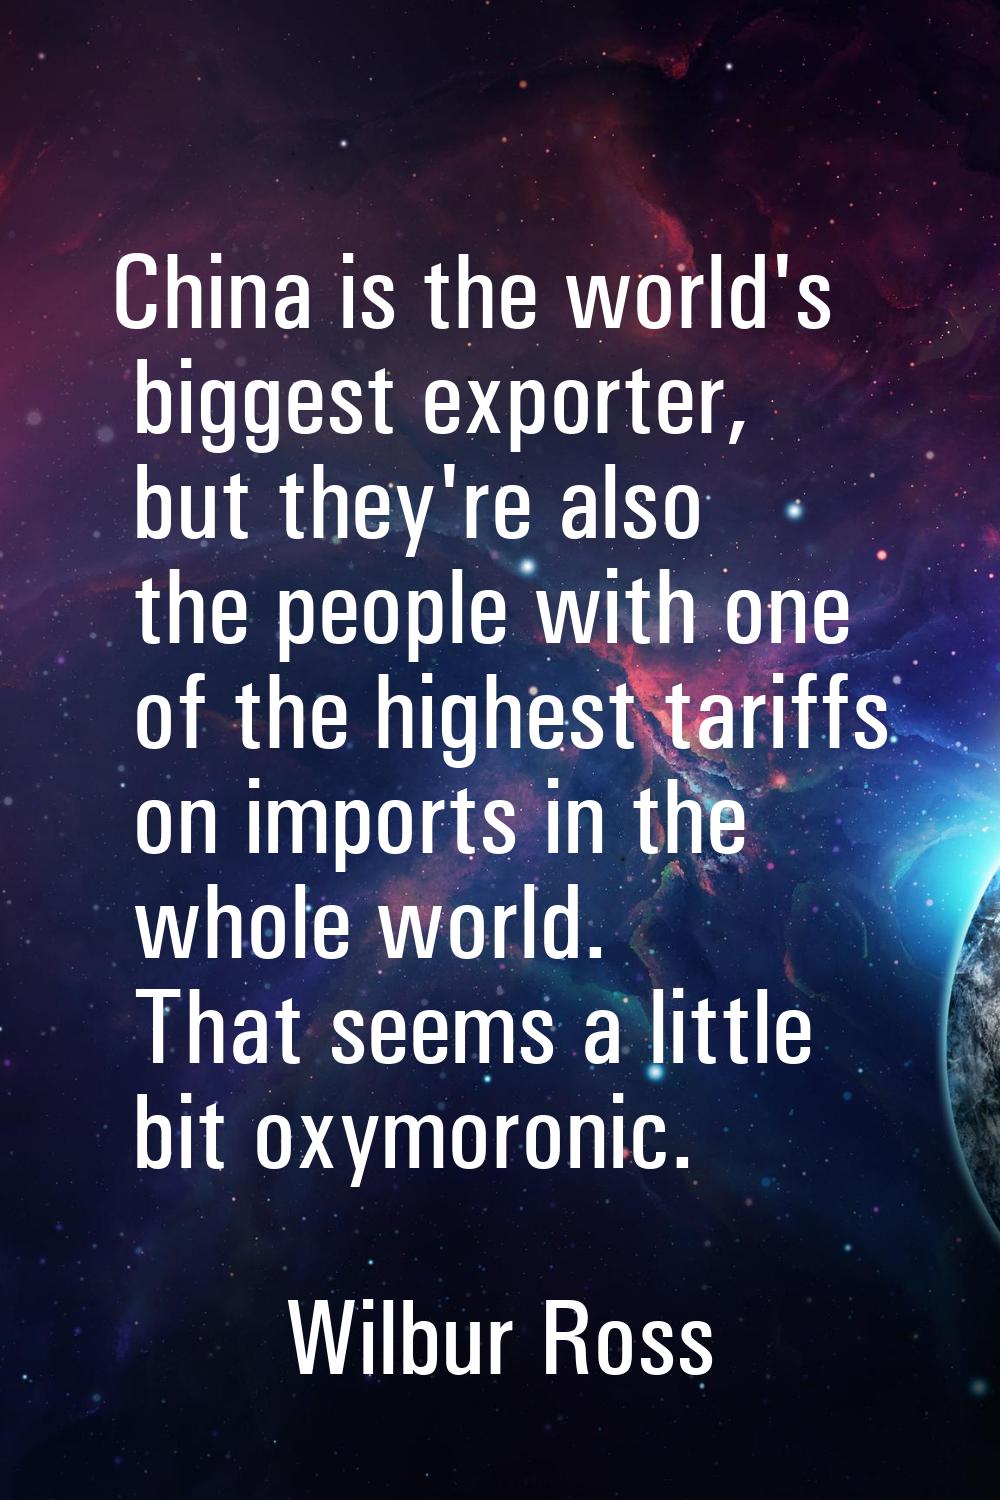 China is the world's biggest exporter, but they're also the people with one of the highest tariffs 